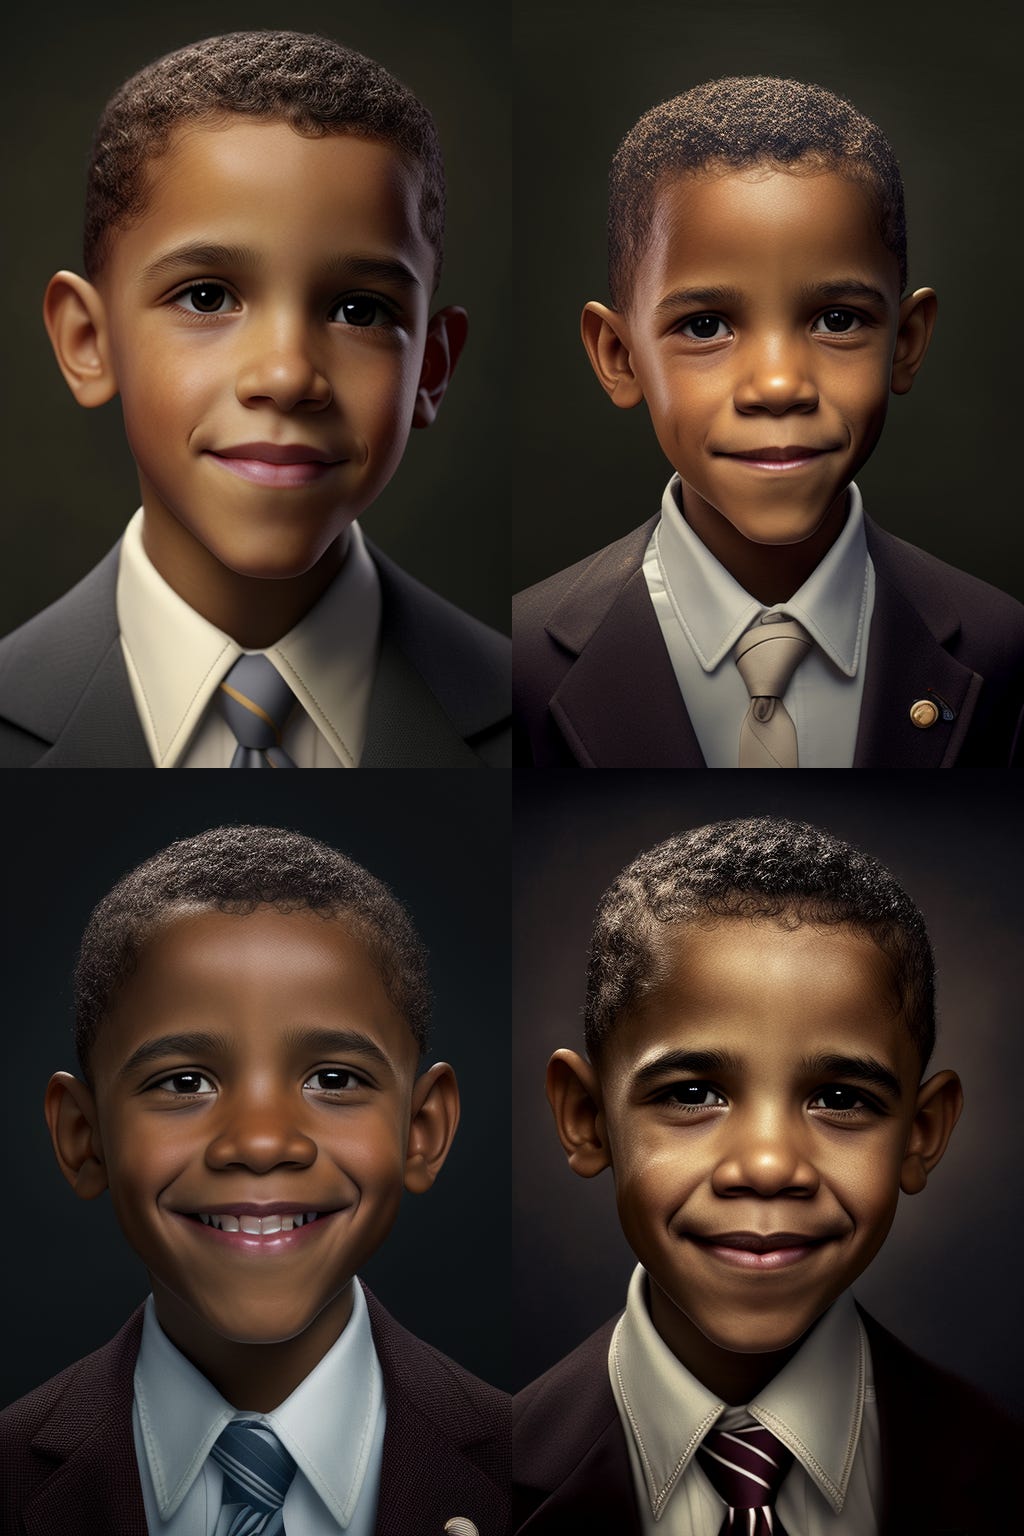 Barack Obama as a kid, portrait, close-up shot, studio photography, volumetric lighting, wearing a suite, smiling, mischievous, realistic, 50mm, expressive, iconic, 4k